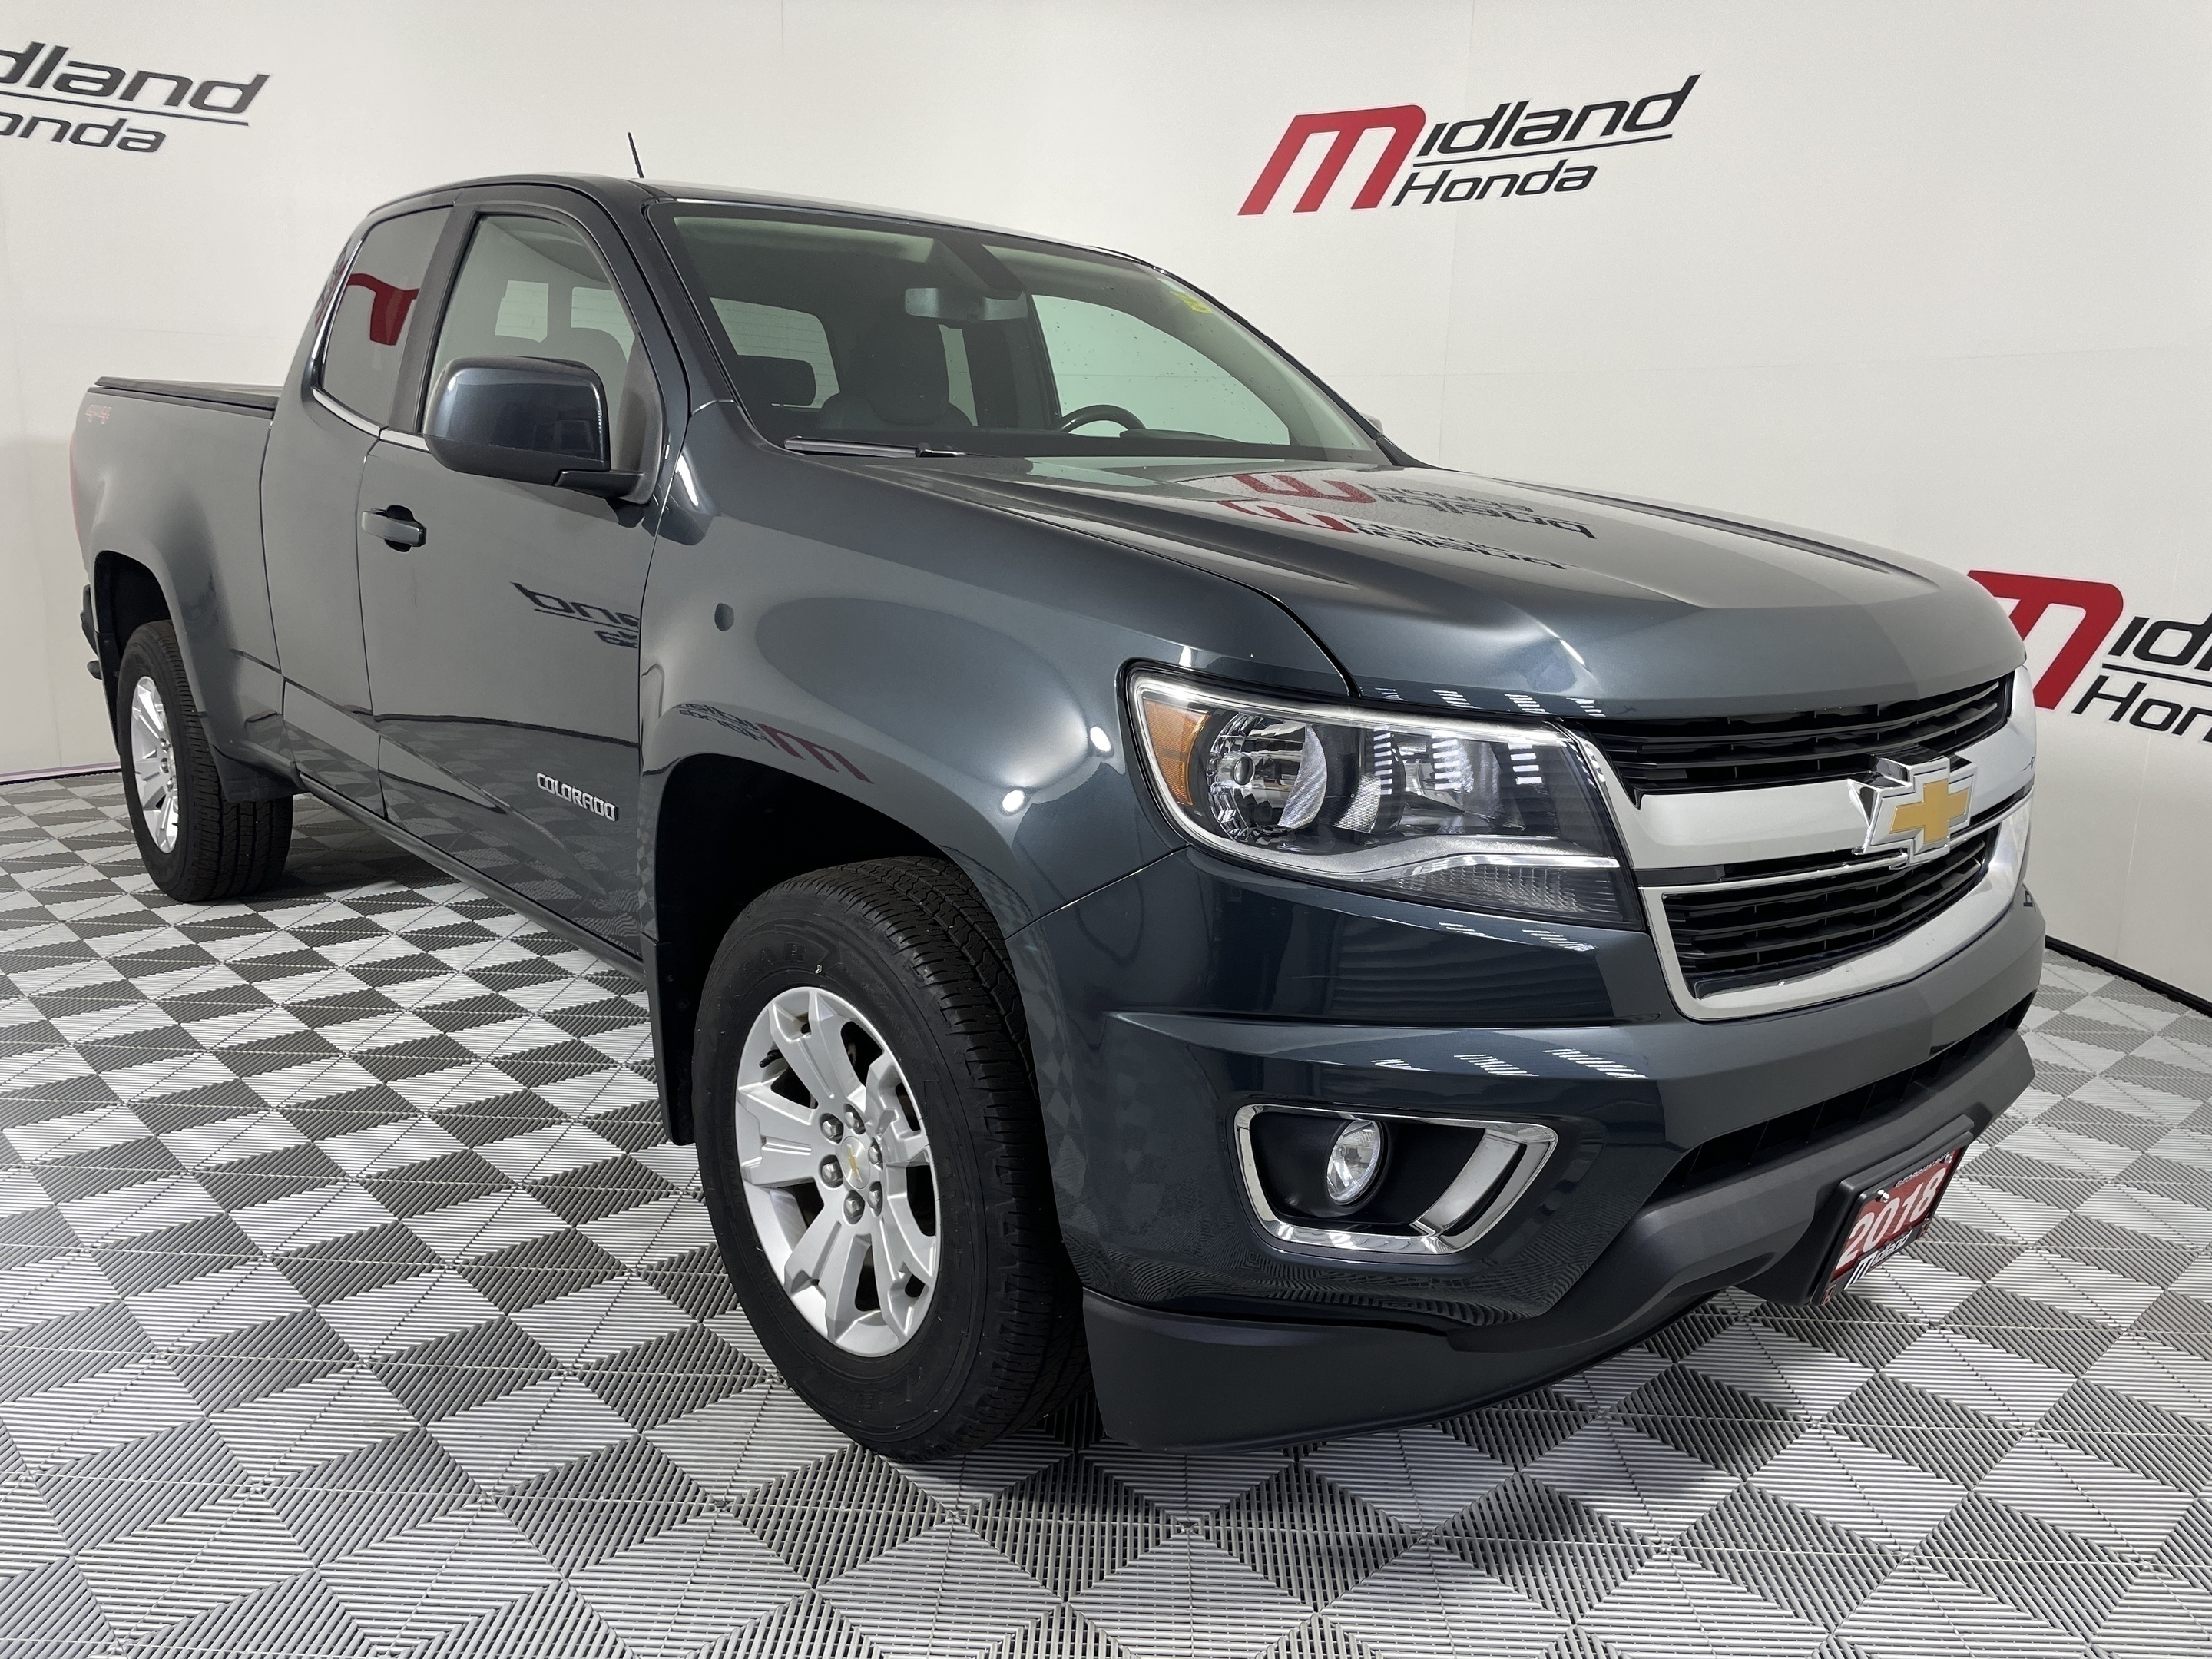 2018 Chevrolet Colorado LT 4x4 1 Owner No Accidents | V6 | Android/Apple